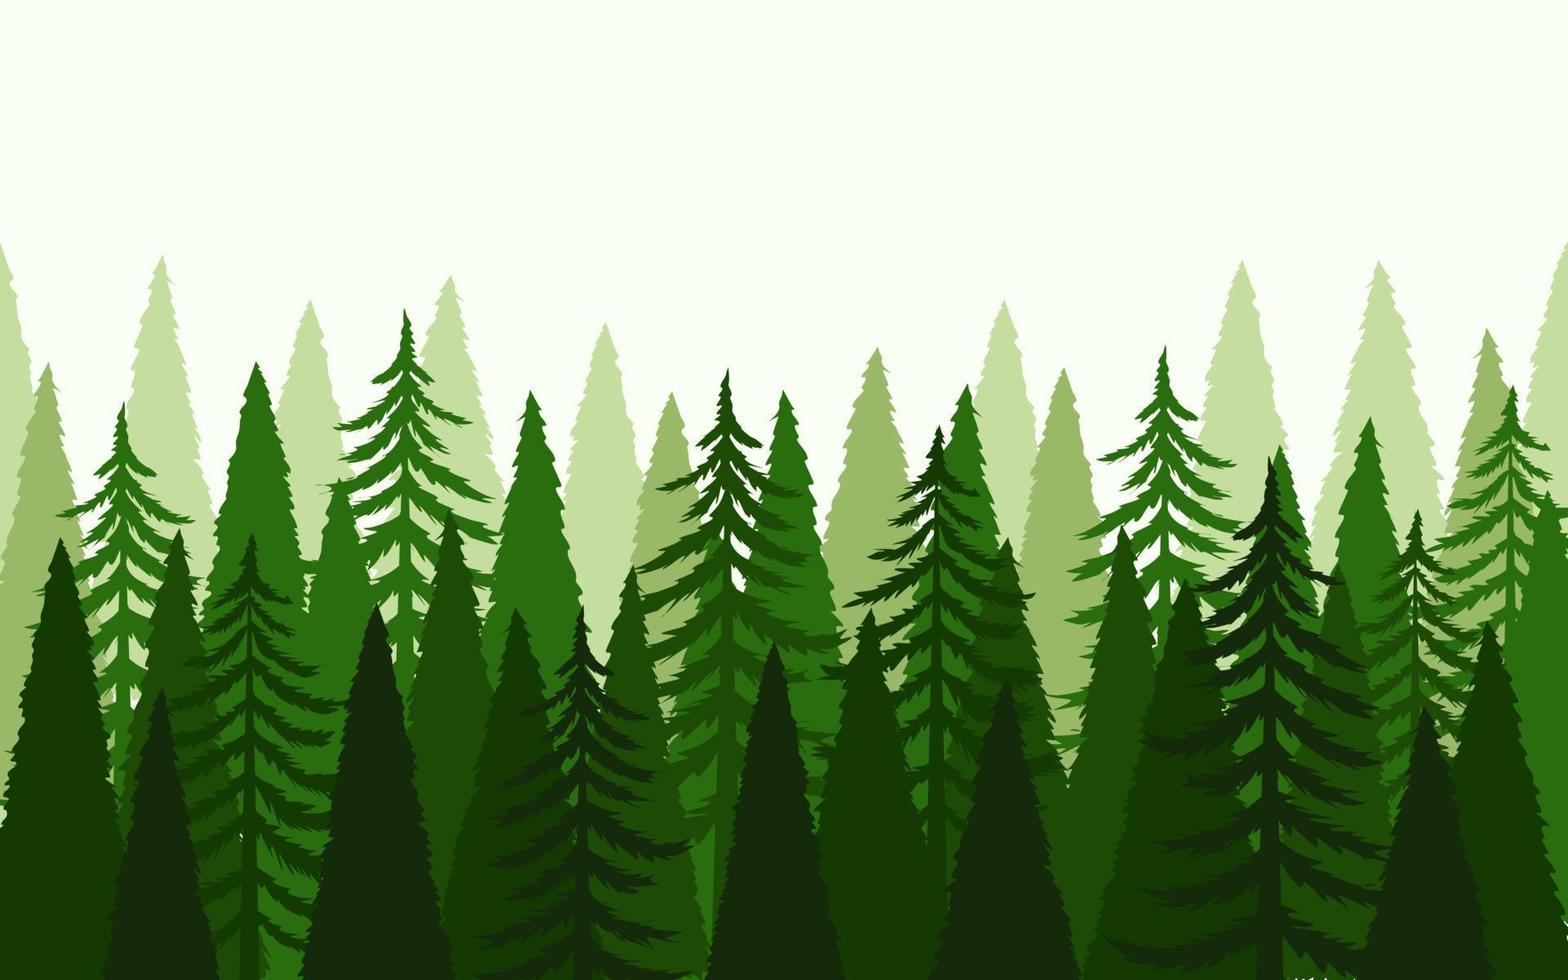 pine trees forest silhouette nature landscape background 10826173